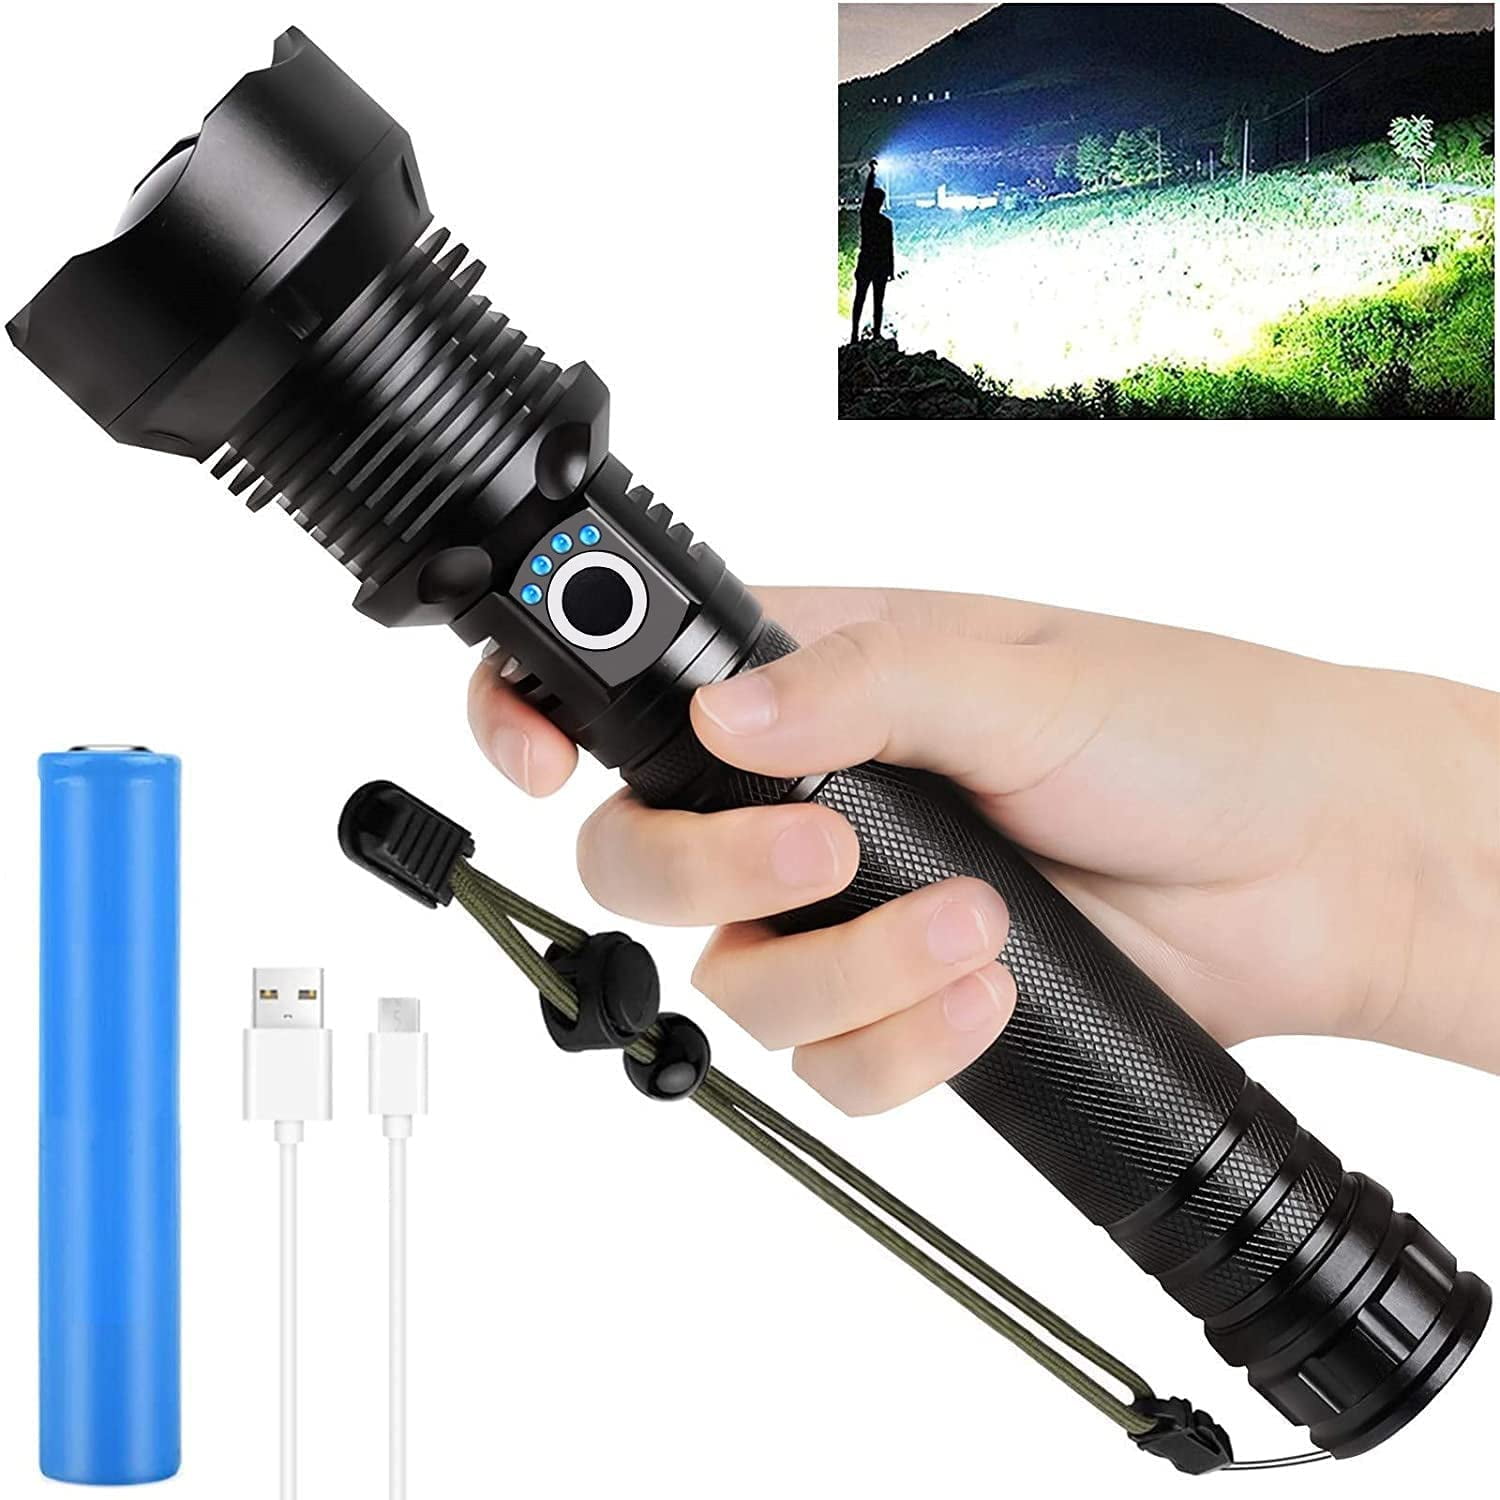 Rechargeable LED Flashlights High Lumens, 90000 Lumens Super Zoomable Waterproof with Batteries Included & 3 Modes, Powerful Handheld Flashlight for Camping Emergencies Walmart Canada